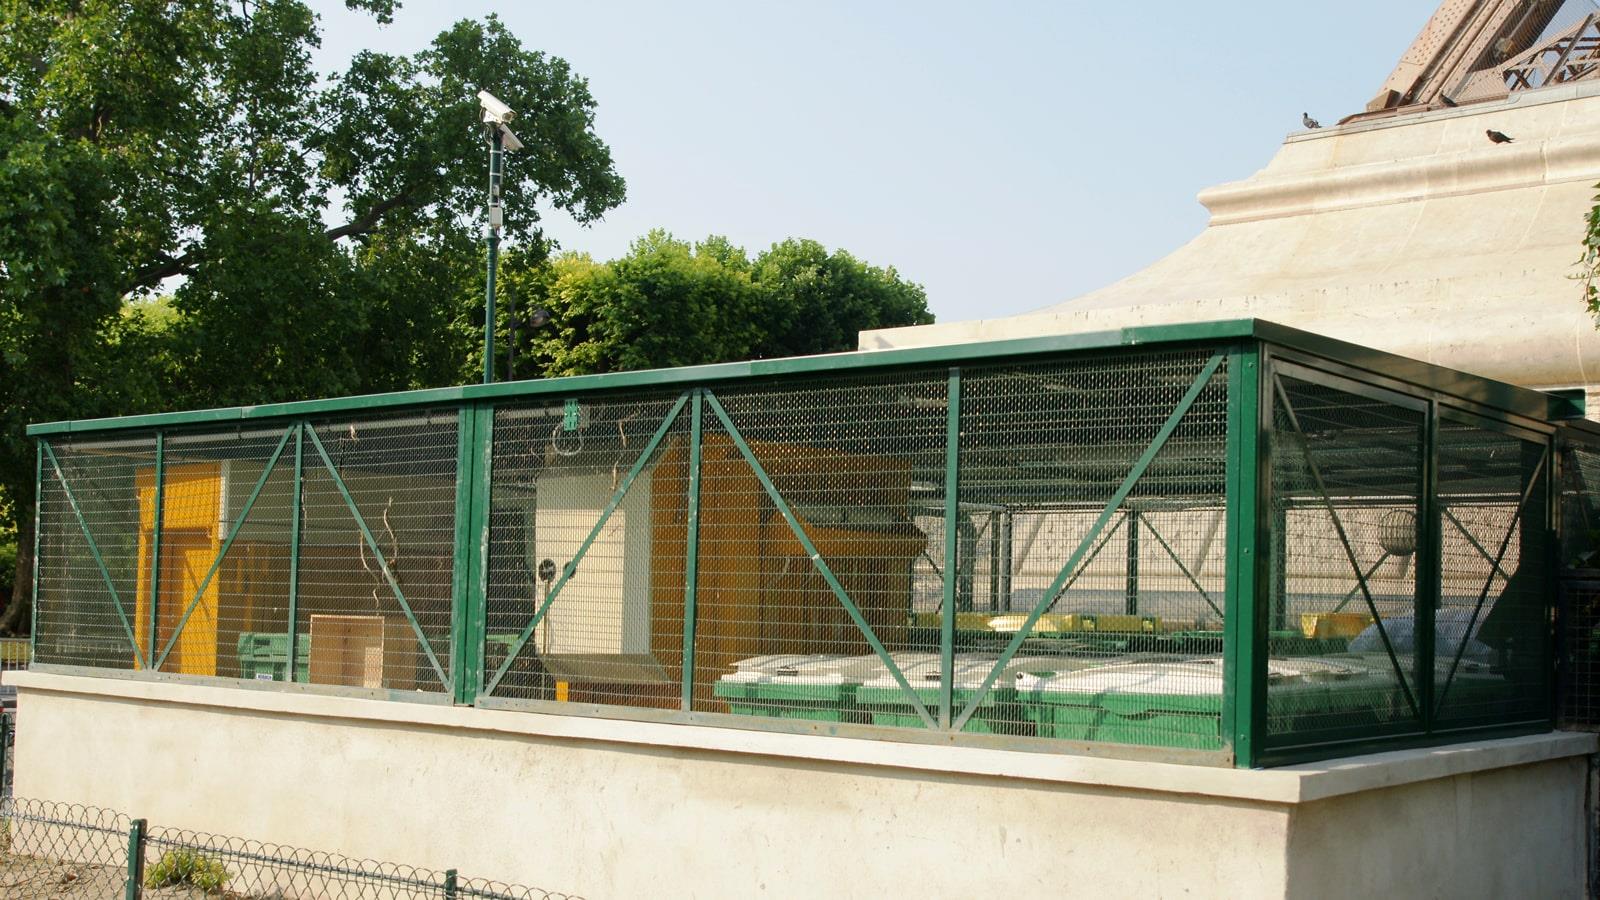 Two Bramidan balers behind green wire fence at the Eiffel Tower